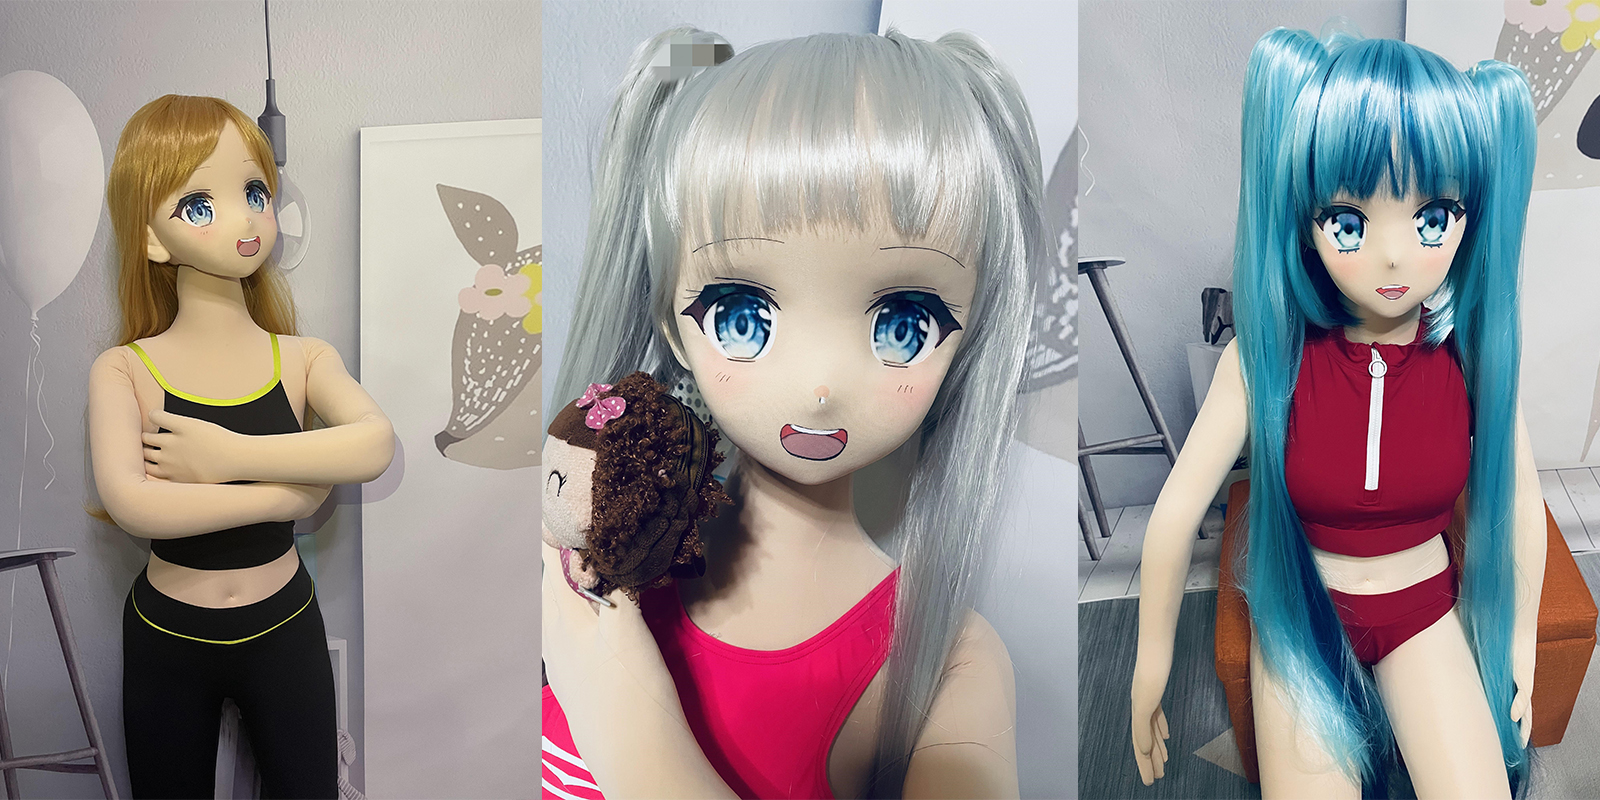 We Provide Various Styles And Sizes Of Fabric Sex Dollsincluding Anime 